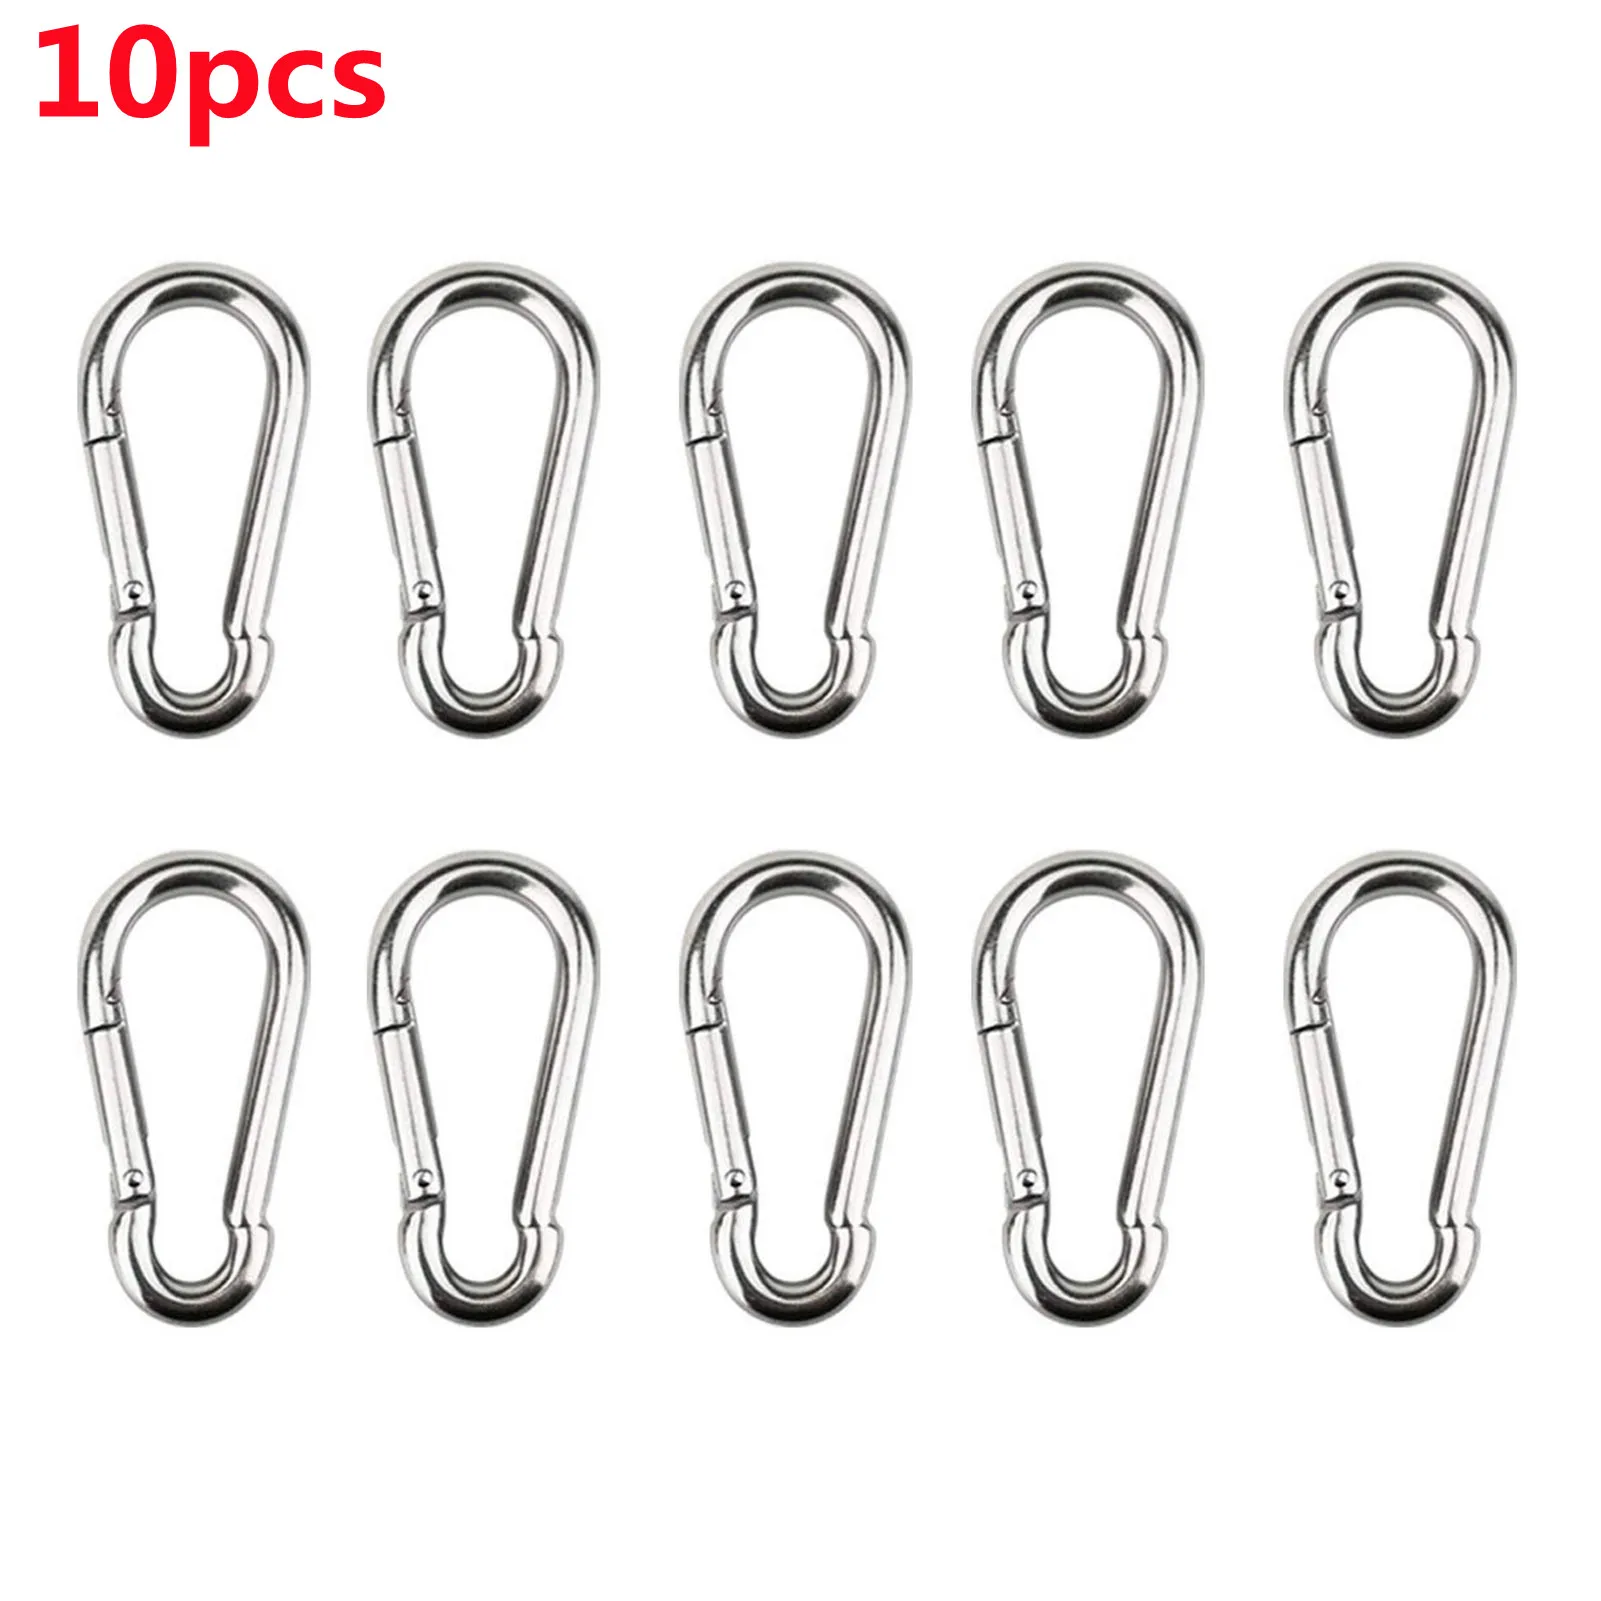 Spring Snap Carabiner Multifunctional Stainless Steel Carabiner With Clip Climbing Hook Buckle Key Ring Bike Travel Decoration